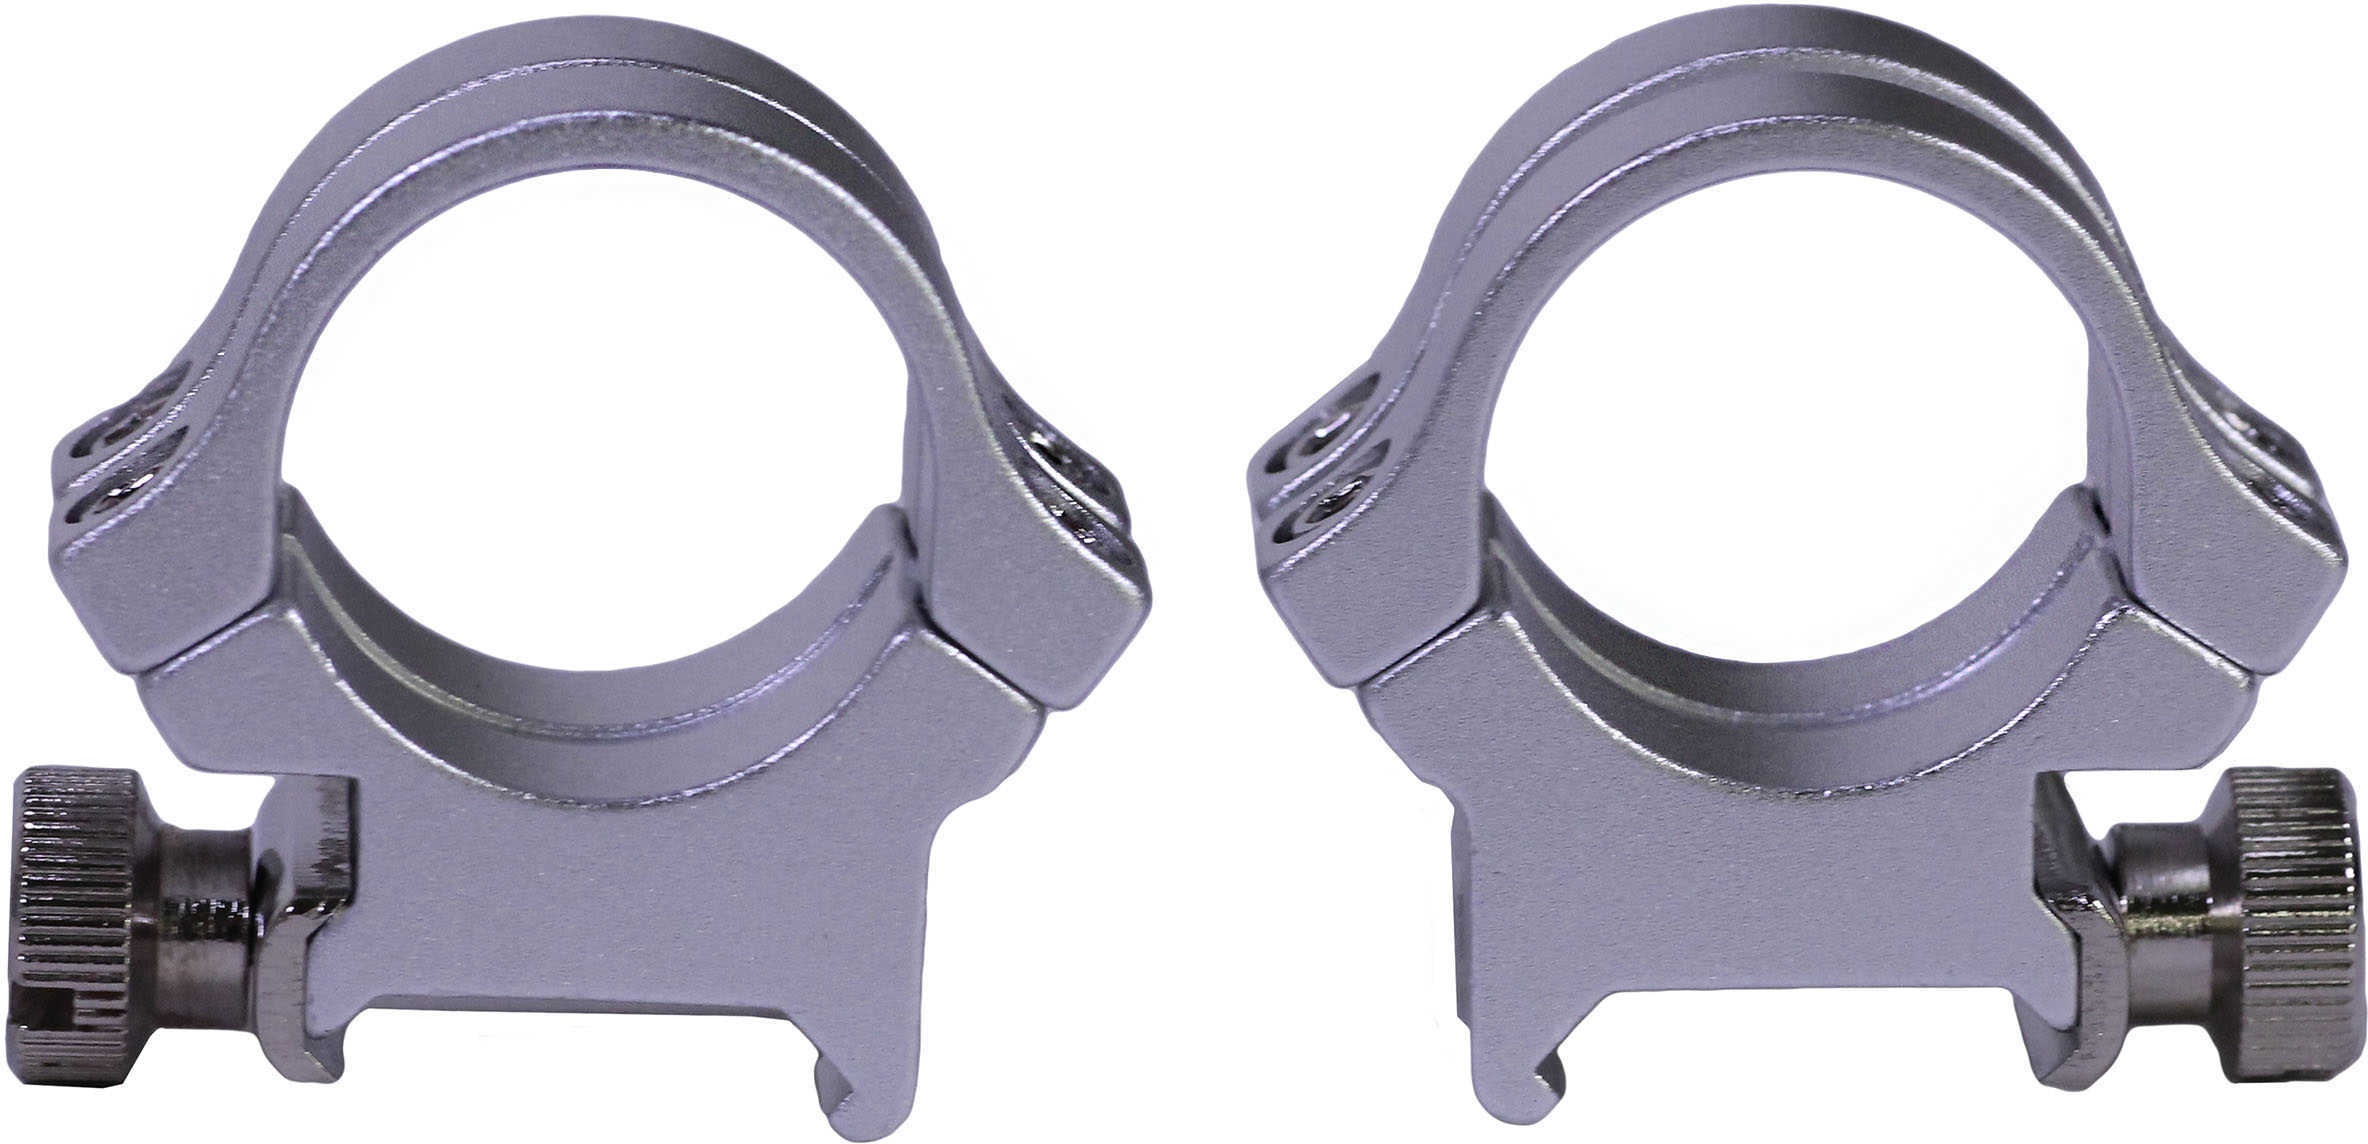 Simmons Weaver High Scope Rings With Silver Finish Md: 49056